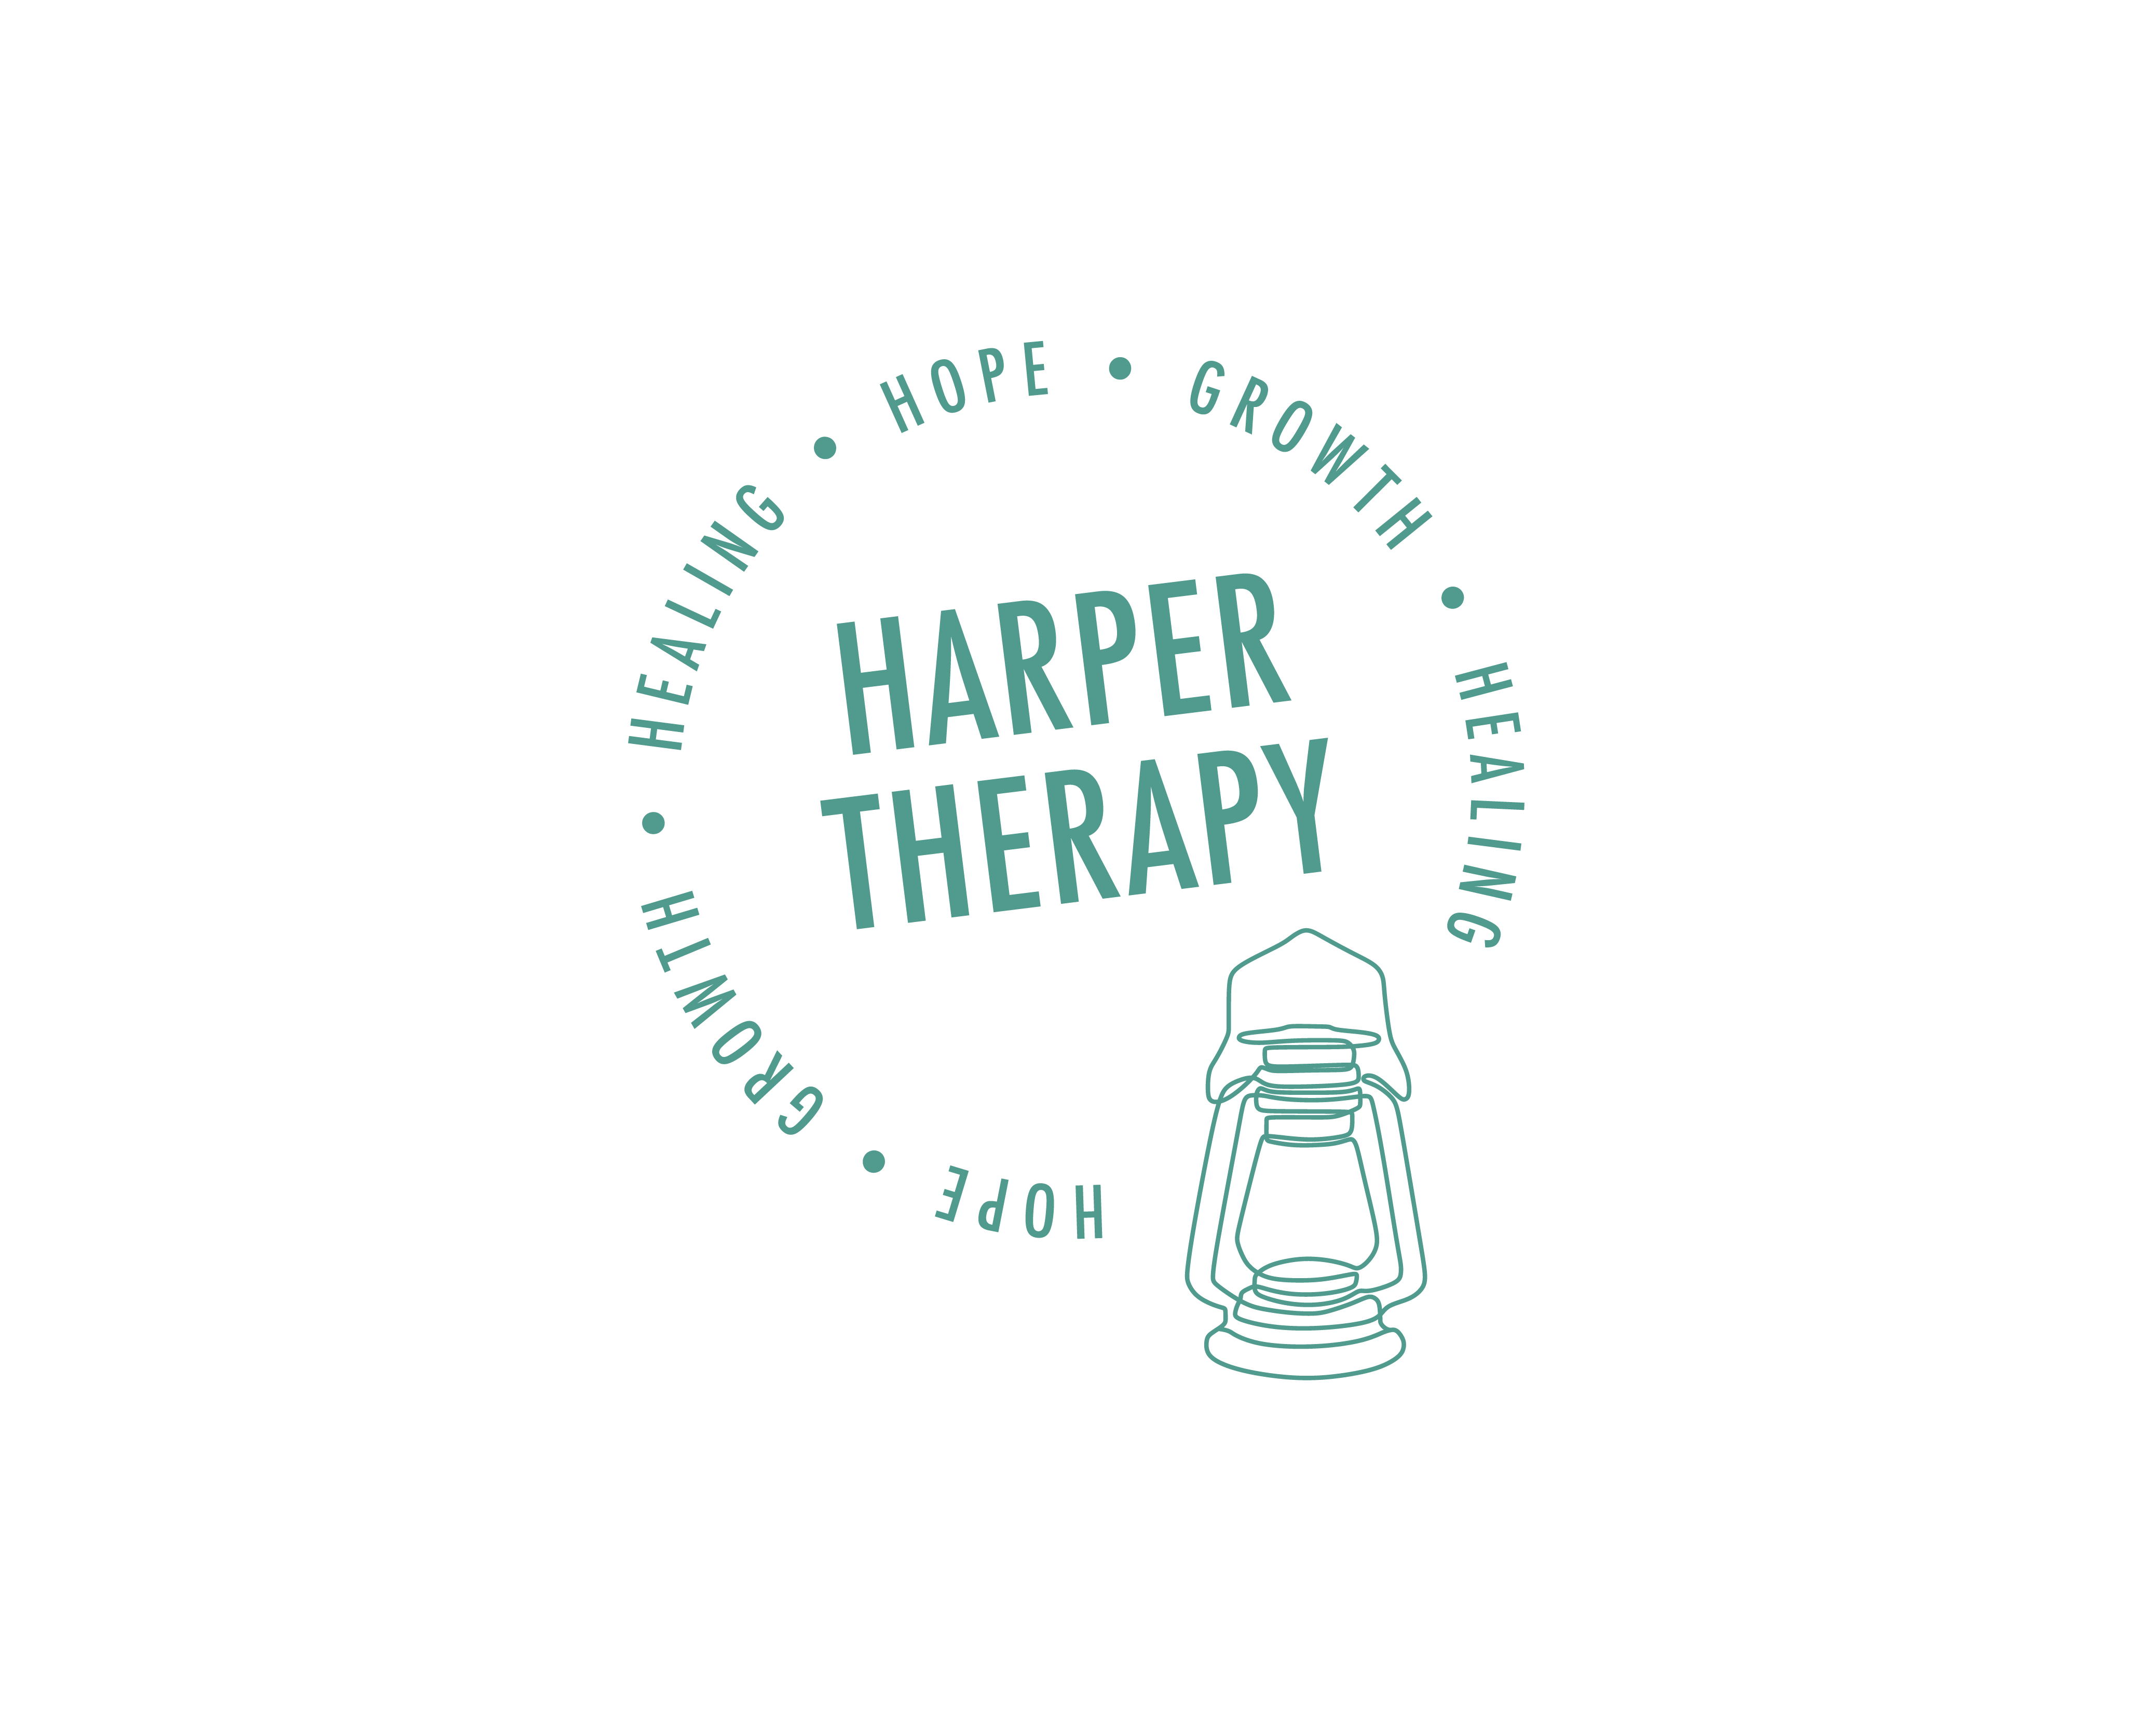 Embrace Your Authentic, Imperfect Self - Harper Therapy